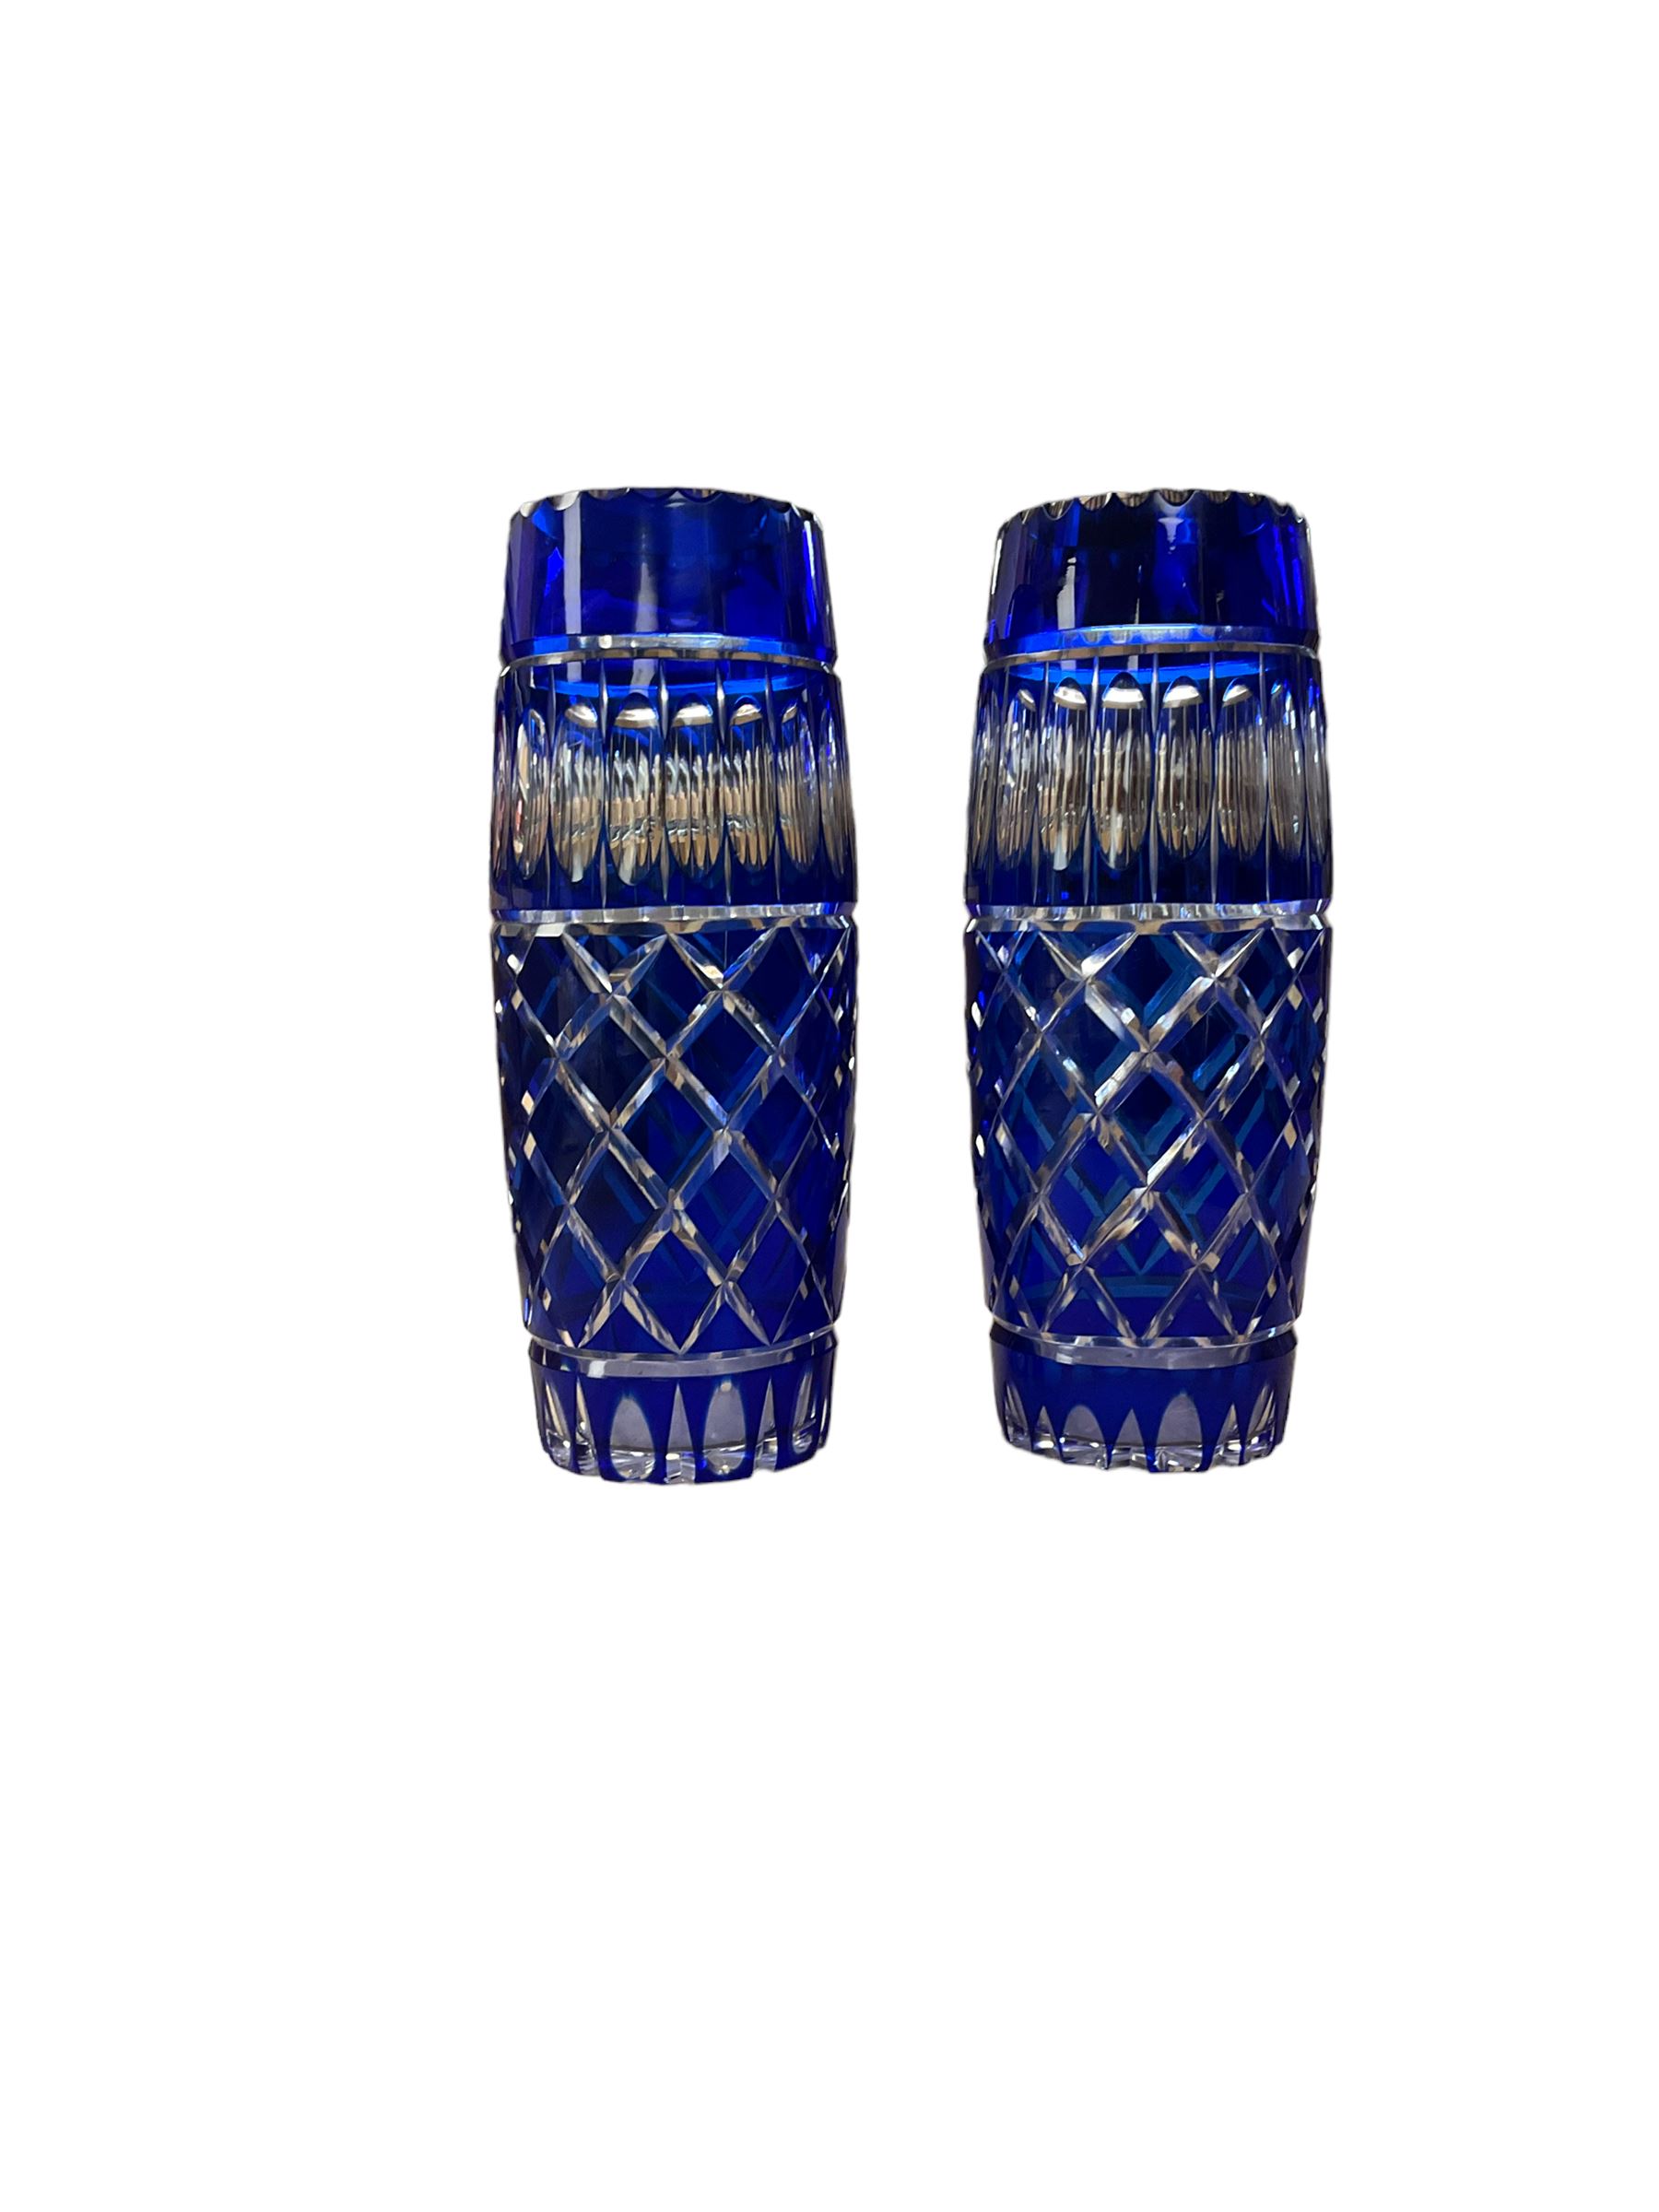 Pair of blue cut glass vases - Image 2 of 3